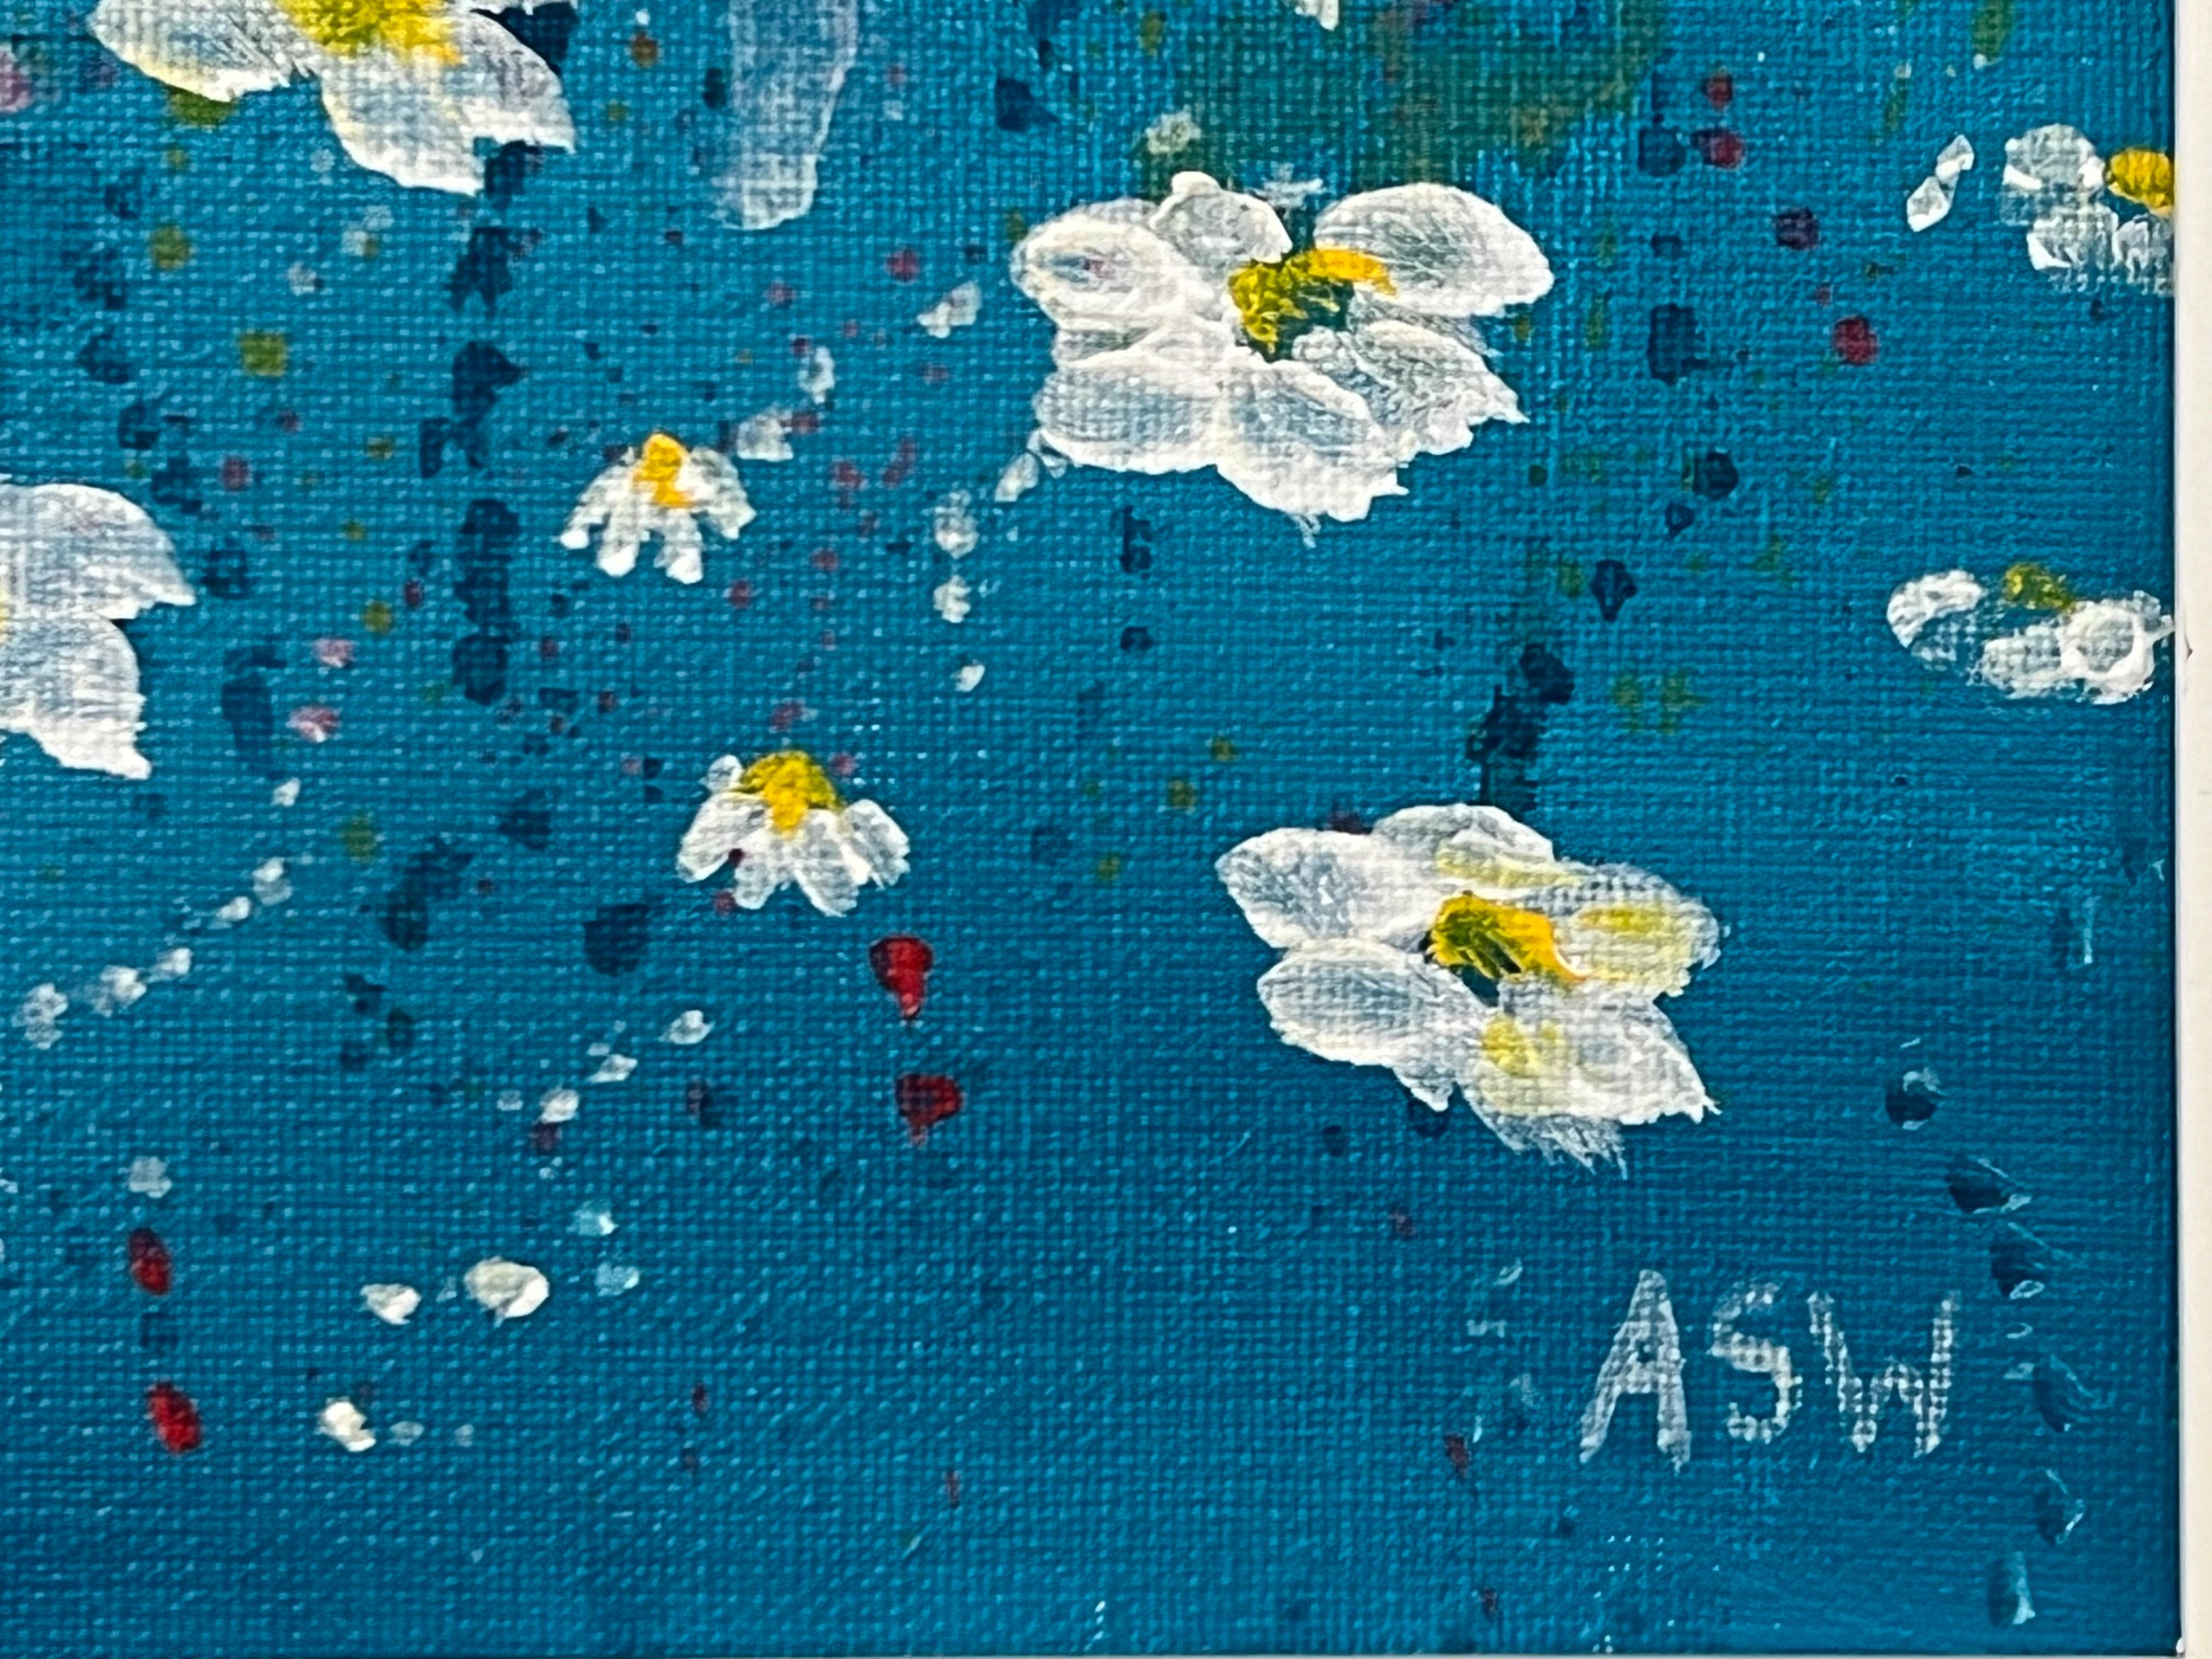 Abstract White Daisy Flowers on Turquoise Background by Contemporary Artist For Sale 10